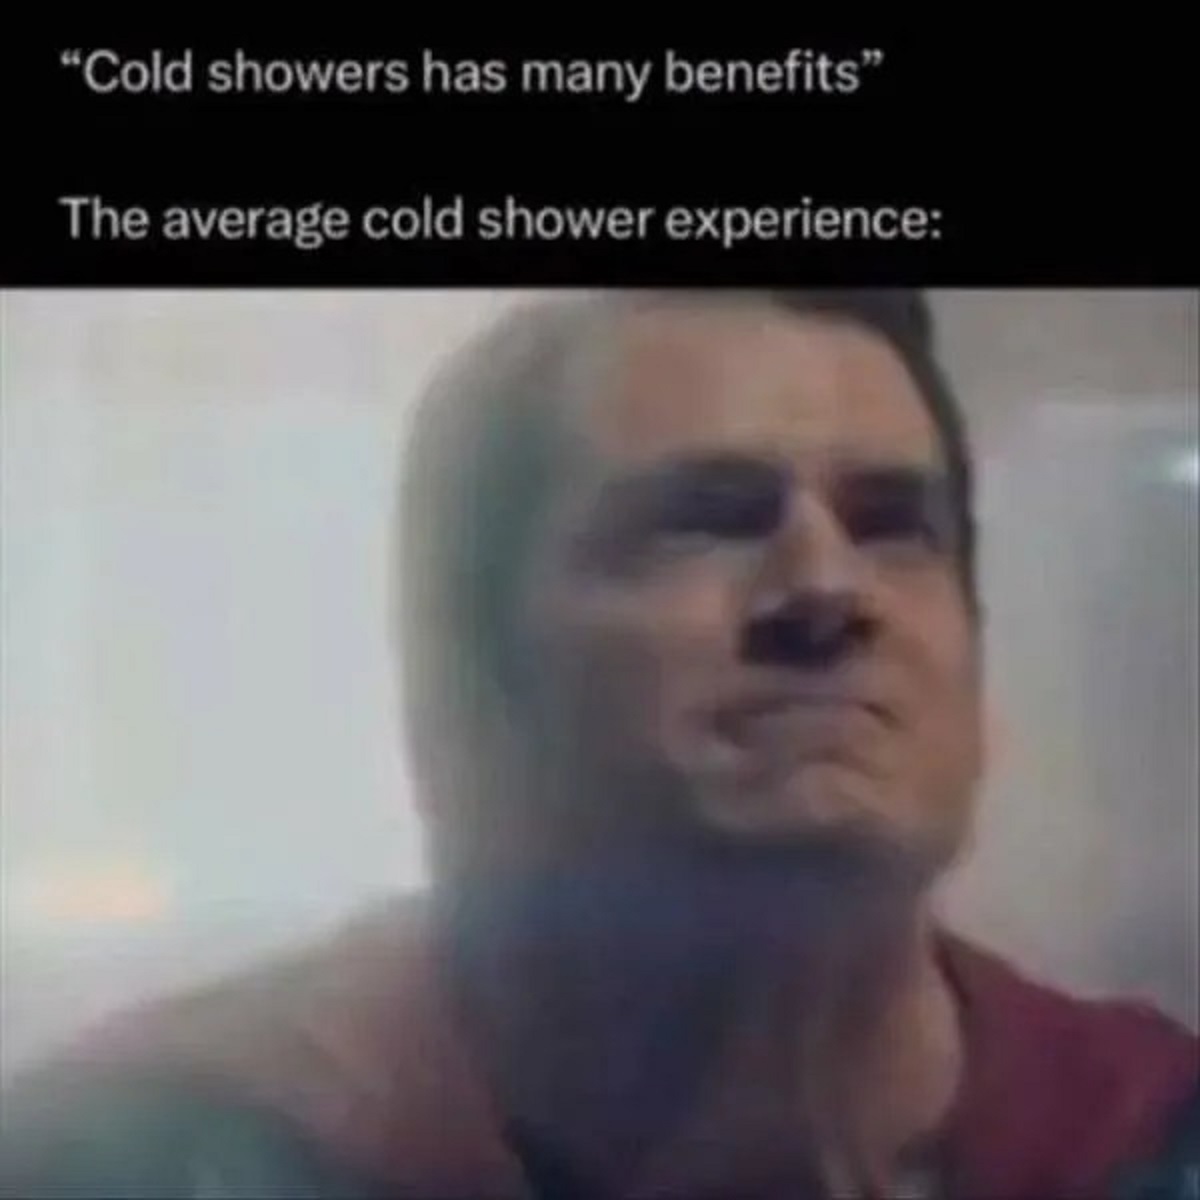 photo caption - "Cold showers has many benefits" The average cold shower experience